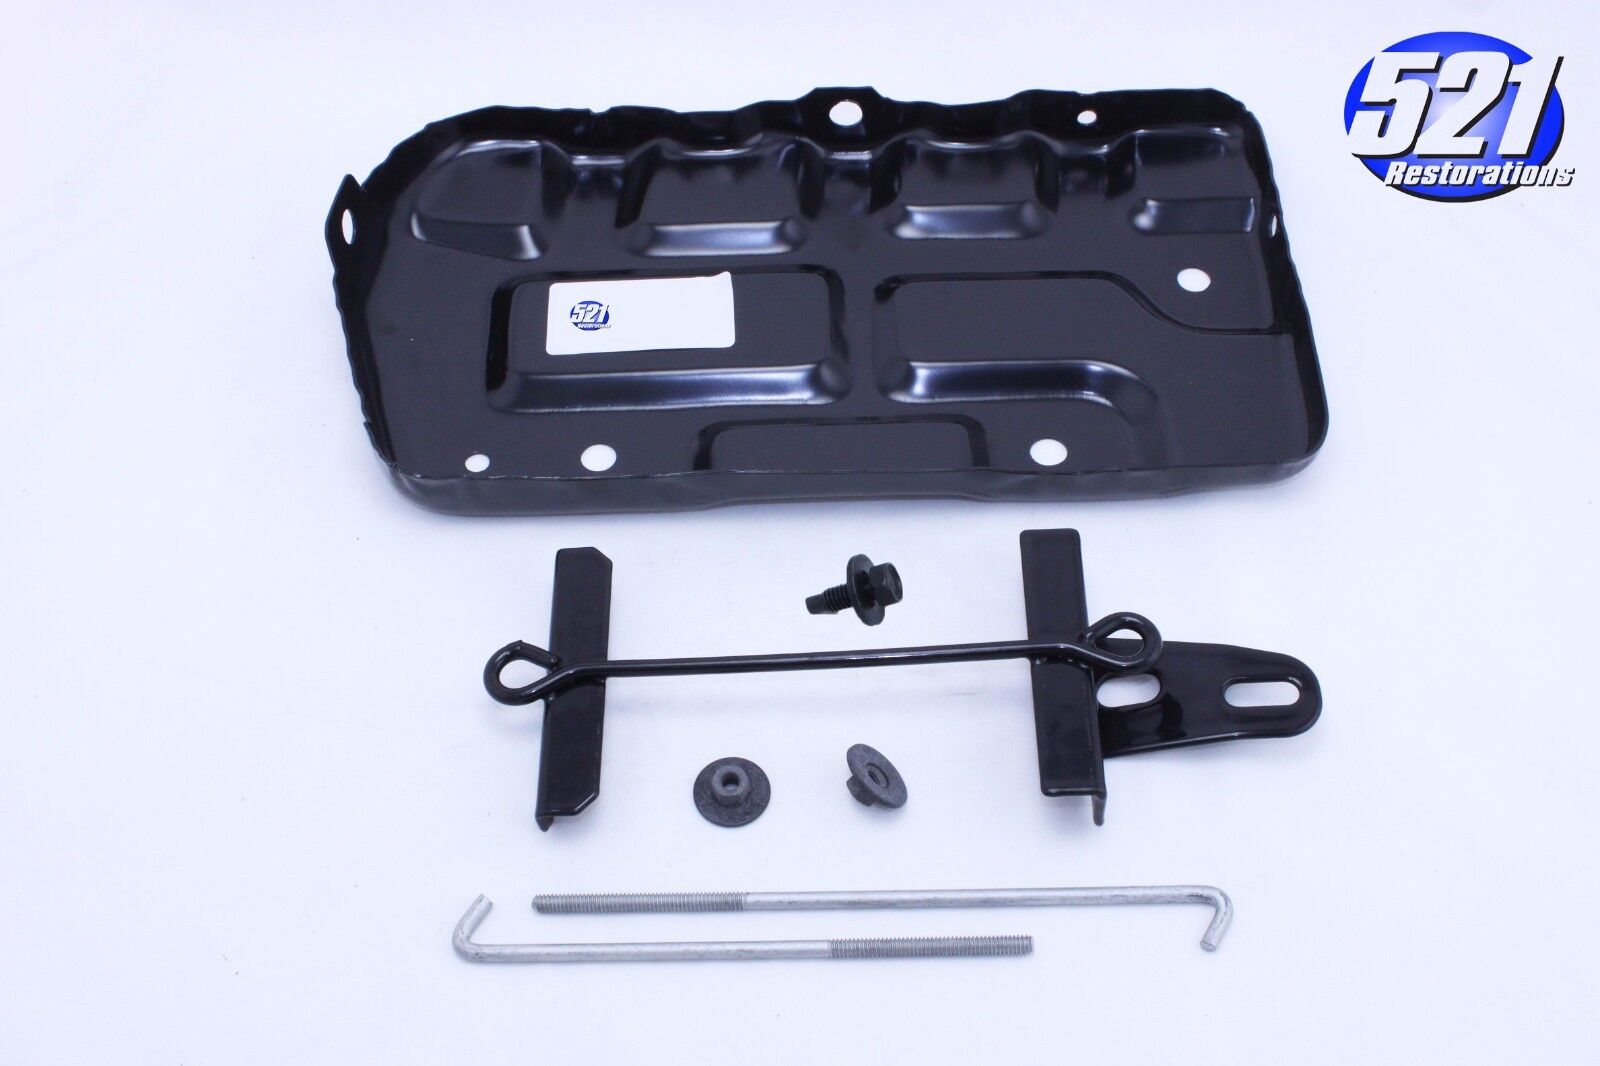 Battery Tray with Strap Kit Fits 73 74 Coronet Charger RoadRunner GTX Mopar